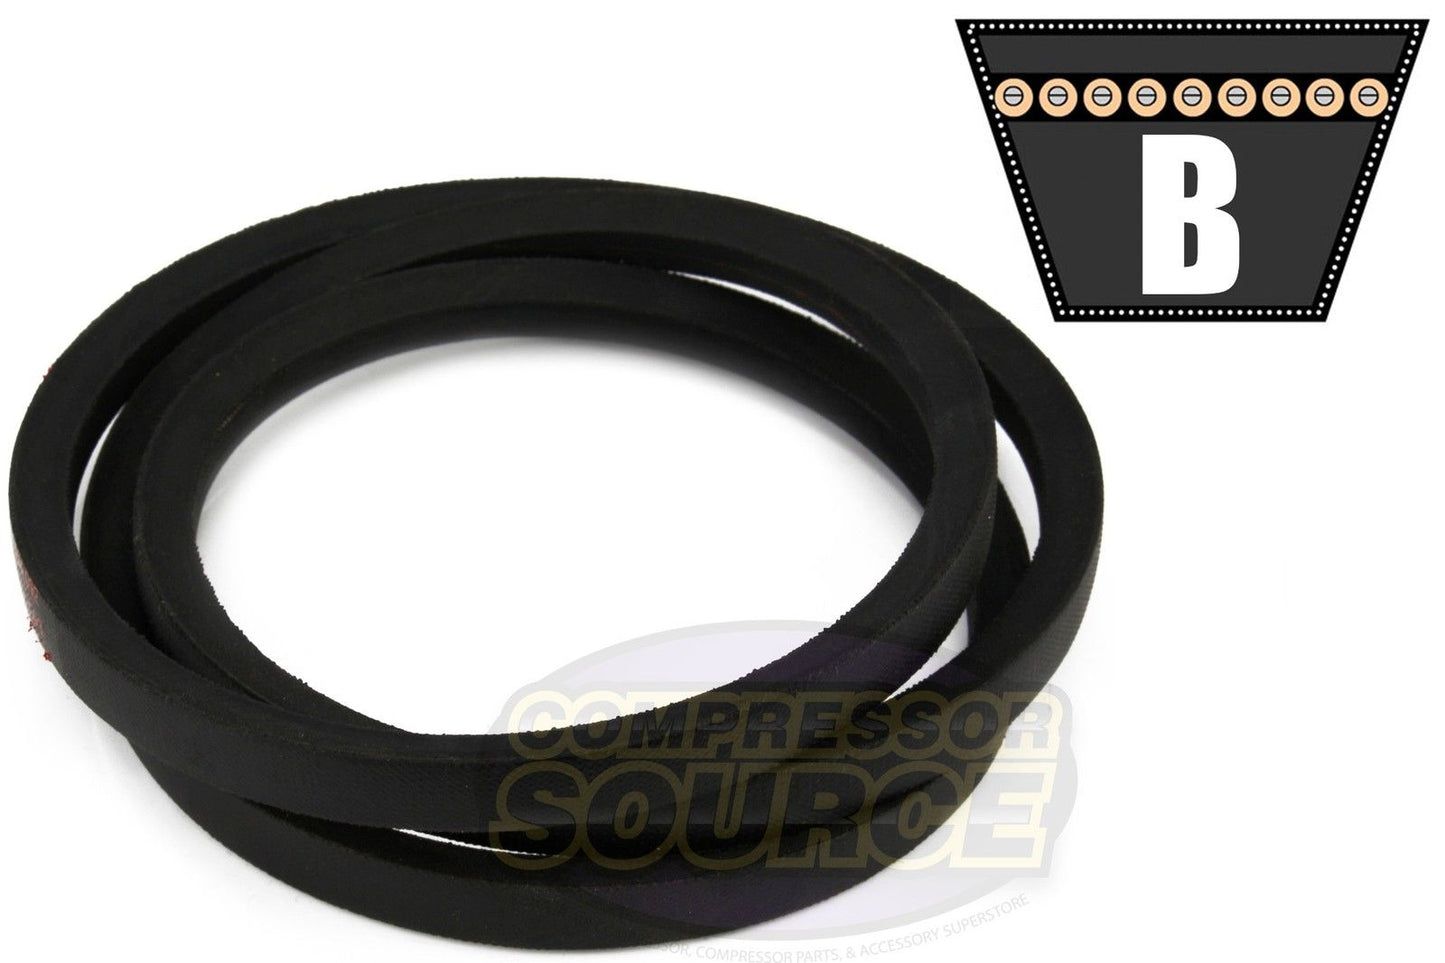 B78 Replacement High Quality Industrial & Lawn Mower 5/8" x 81"  V Belt 5L810